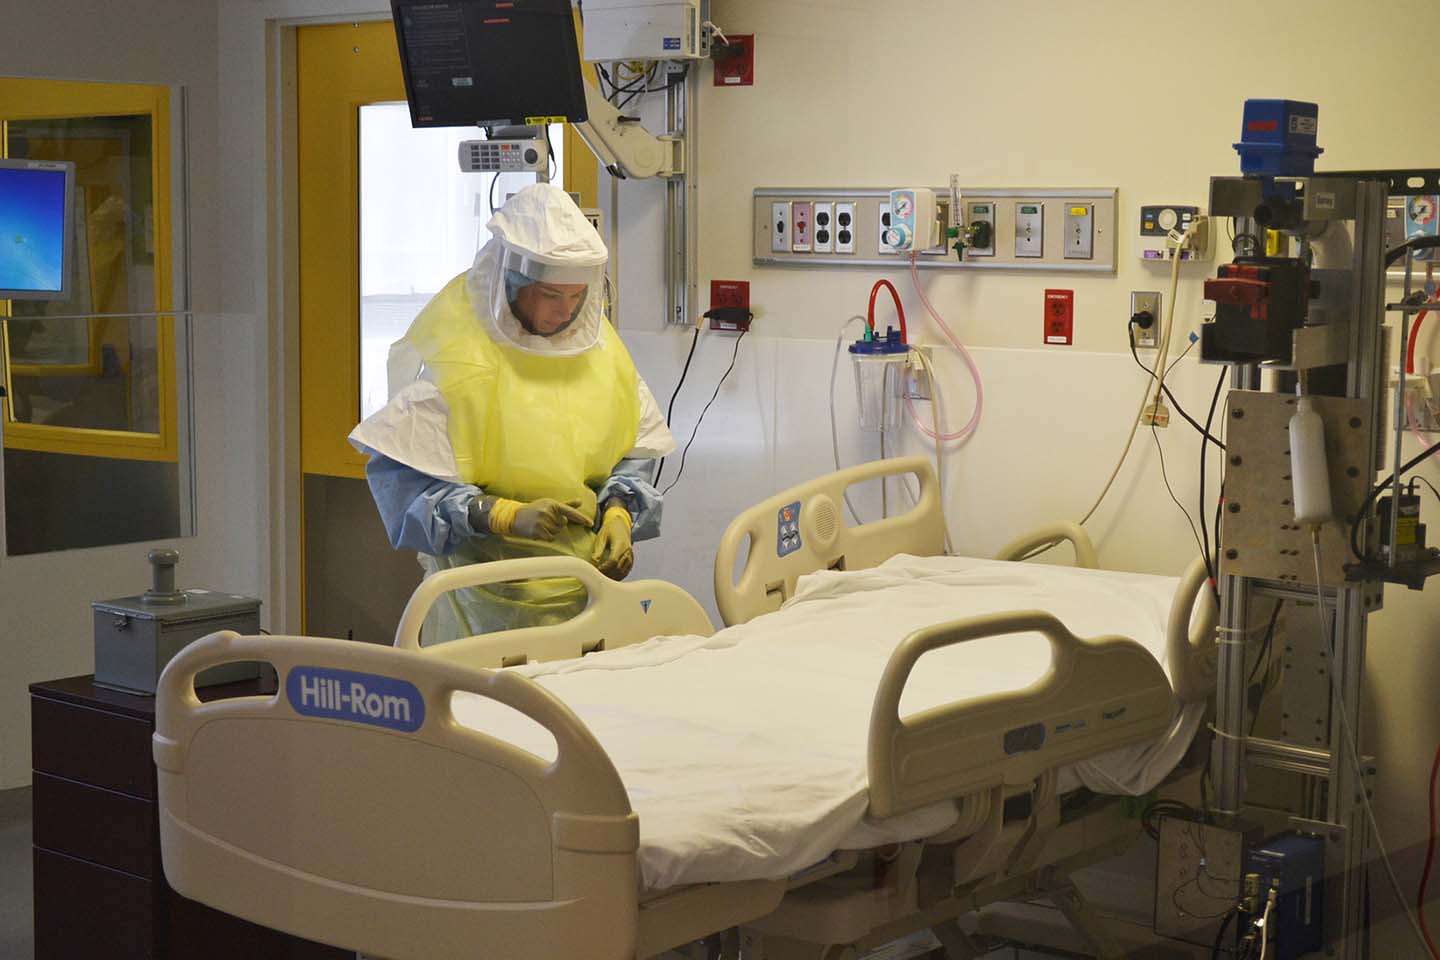 Nurse Mallory Reimers goes through the steps of caring for an infected patient